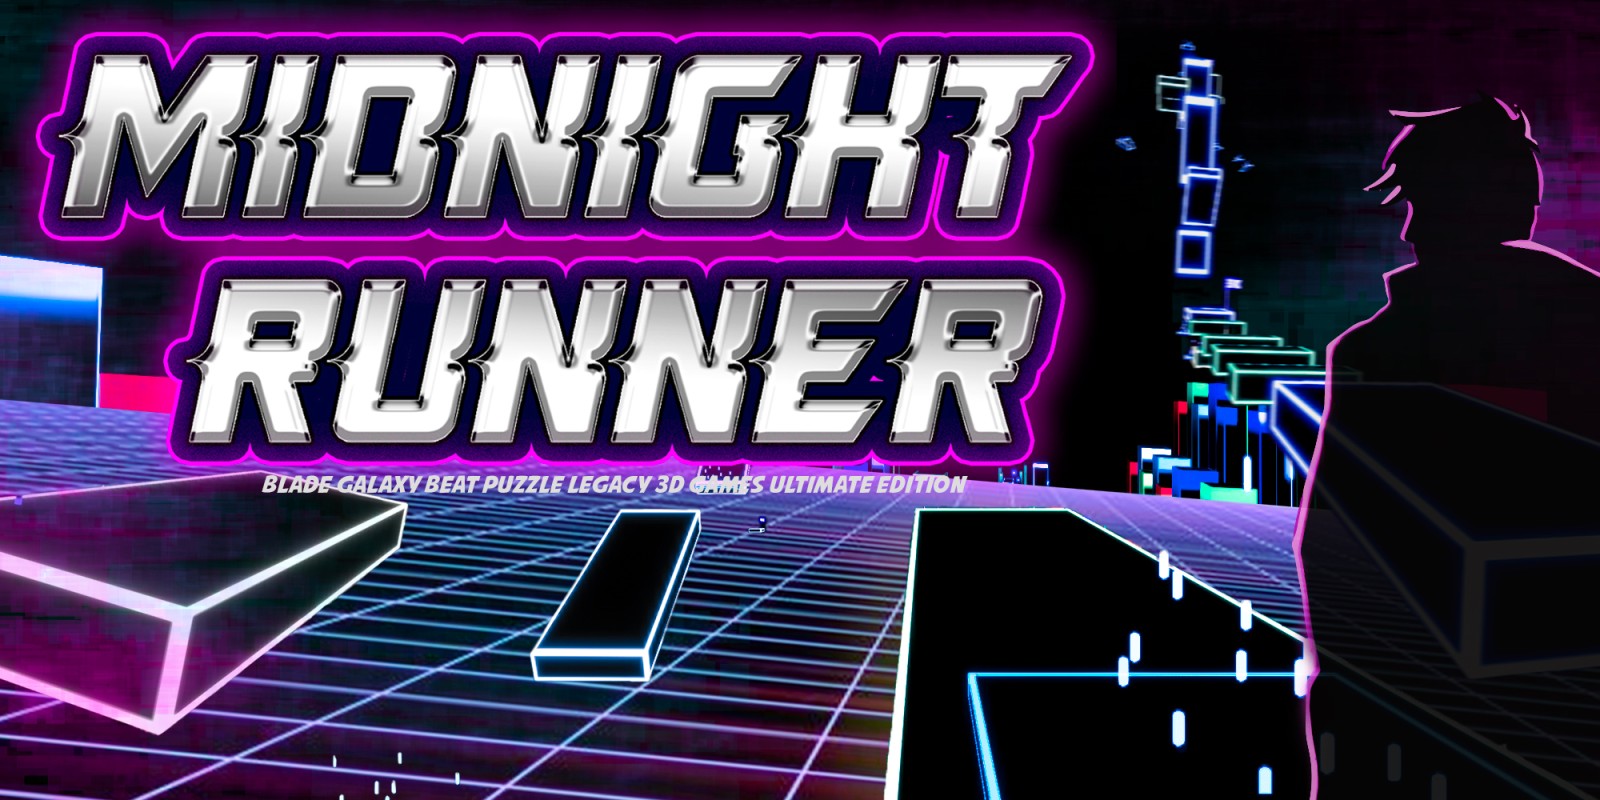 Midnight Runner - Blade Galaxy Beat Puzzle Legacy 3D Games Ultimate Edition